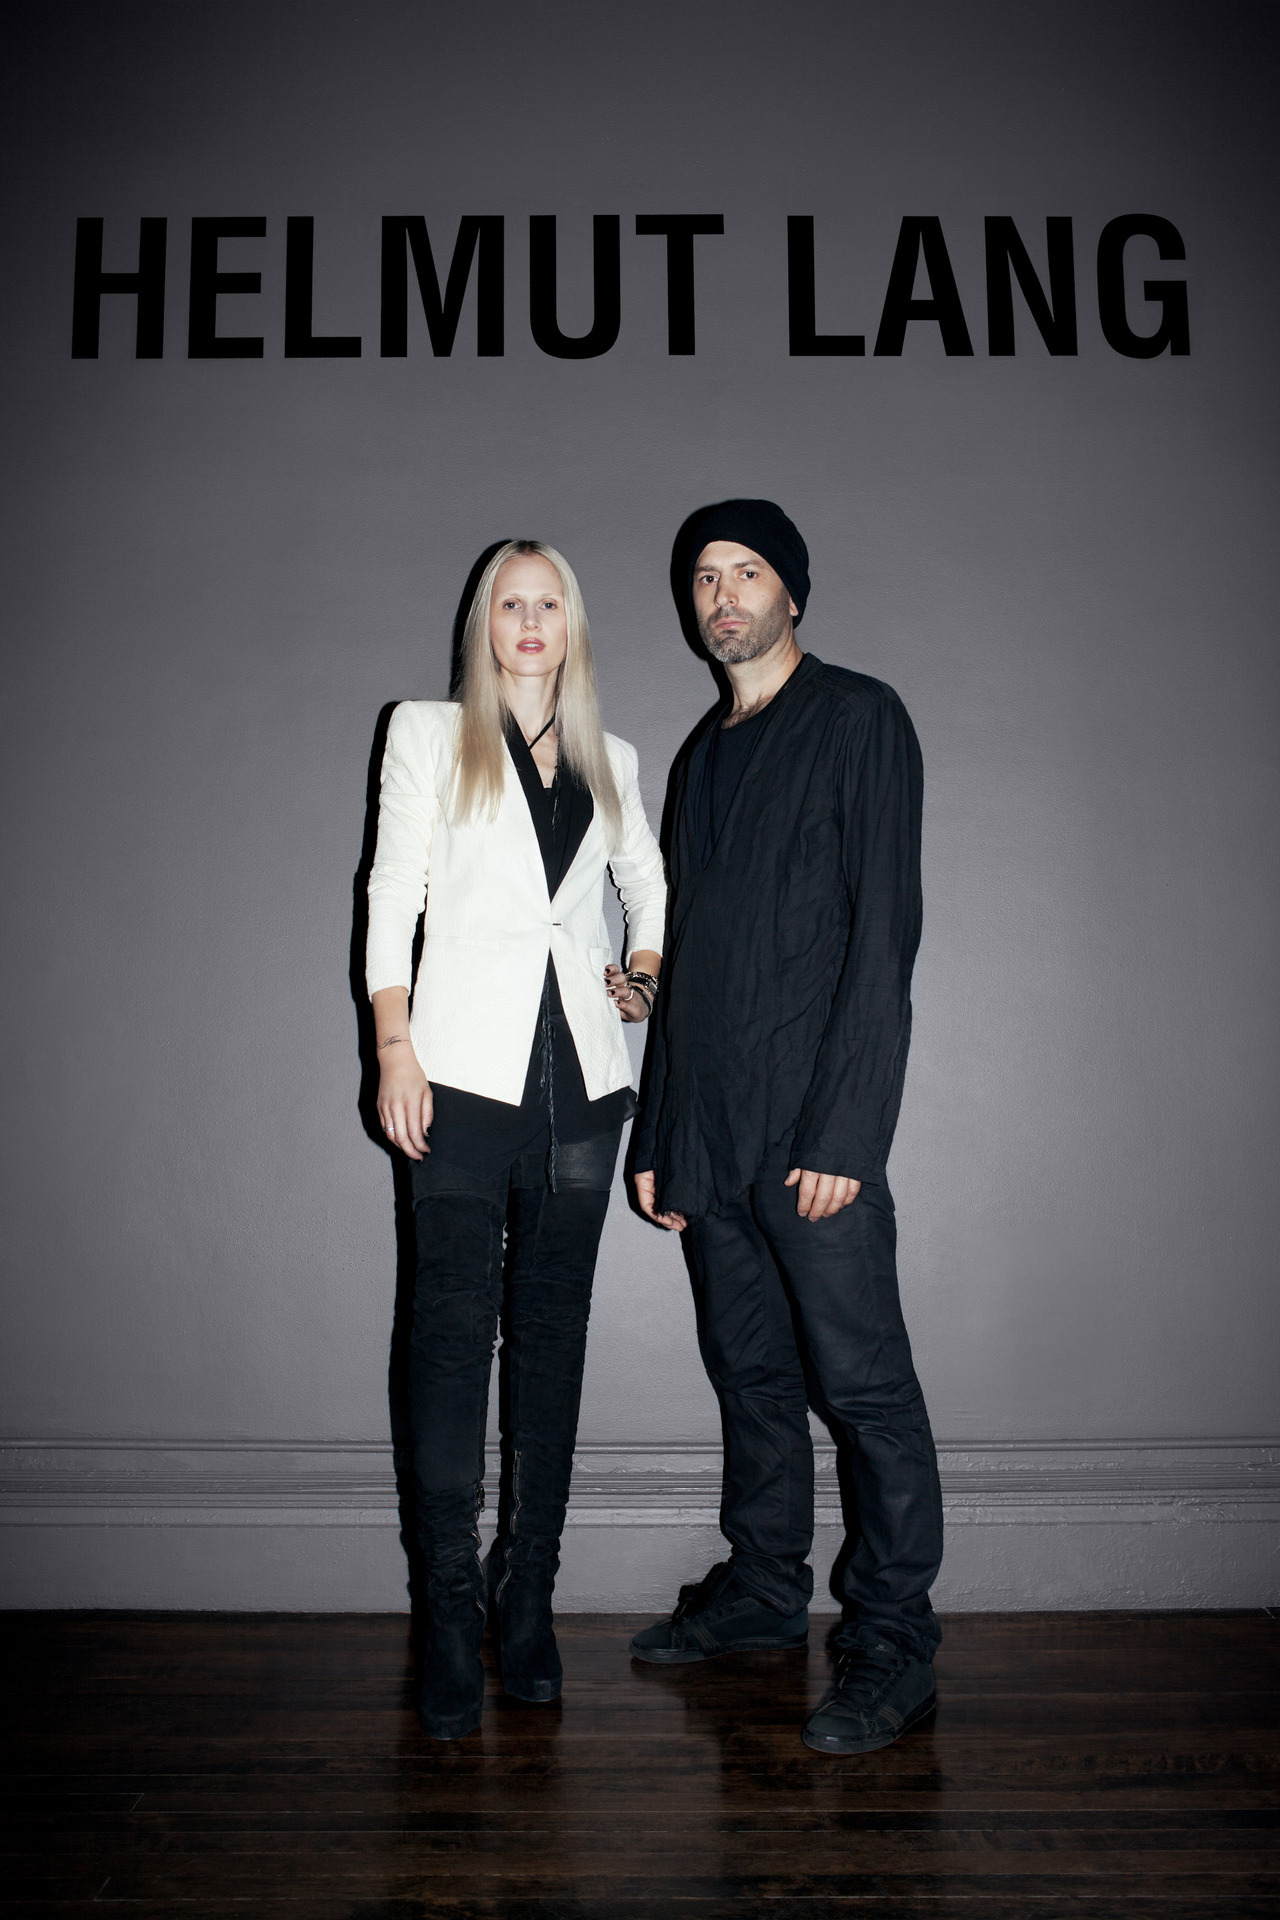 Nicole and Michael Colovos at Helmut Lang, photographed by Jens Ingvarsson.